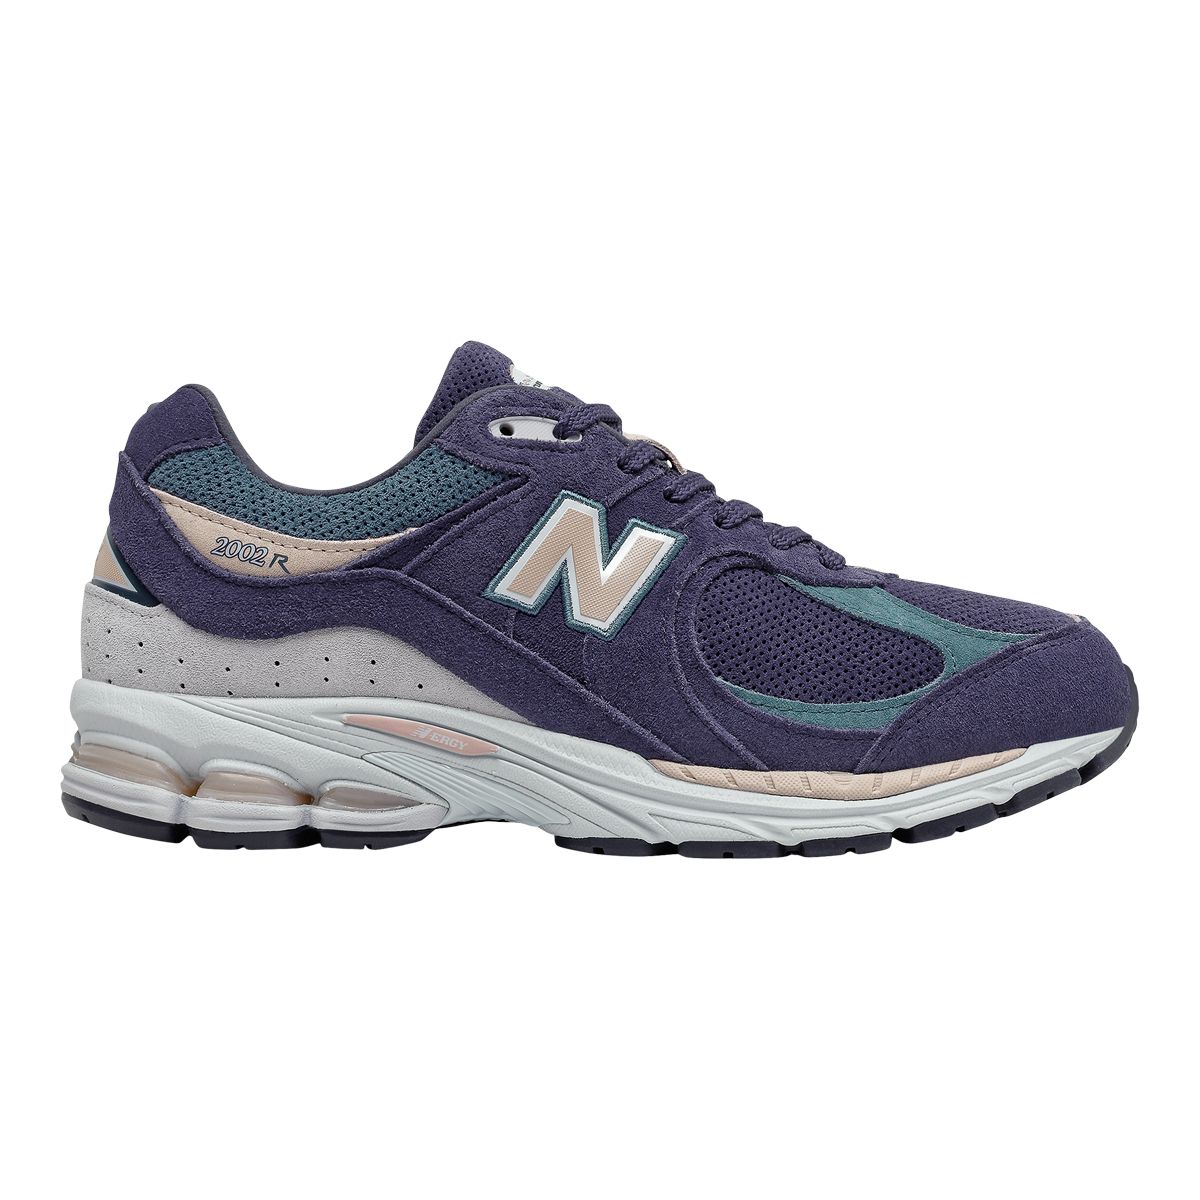 New Balance Men's 2002R Shoes  Sneakers